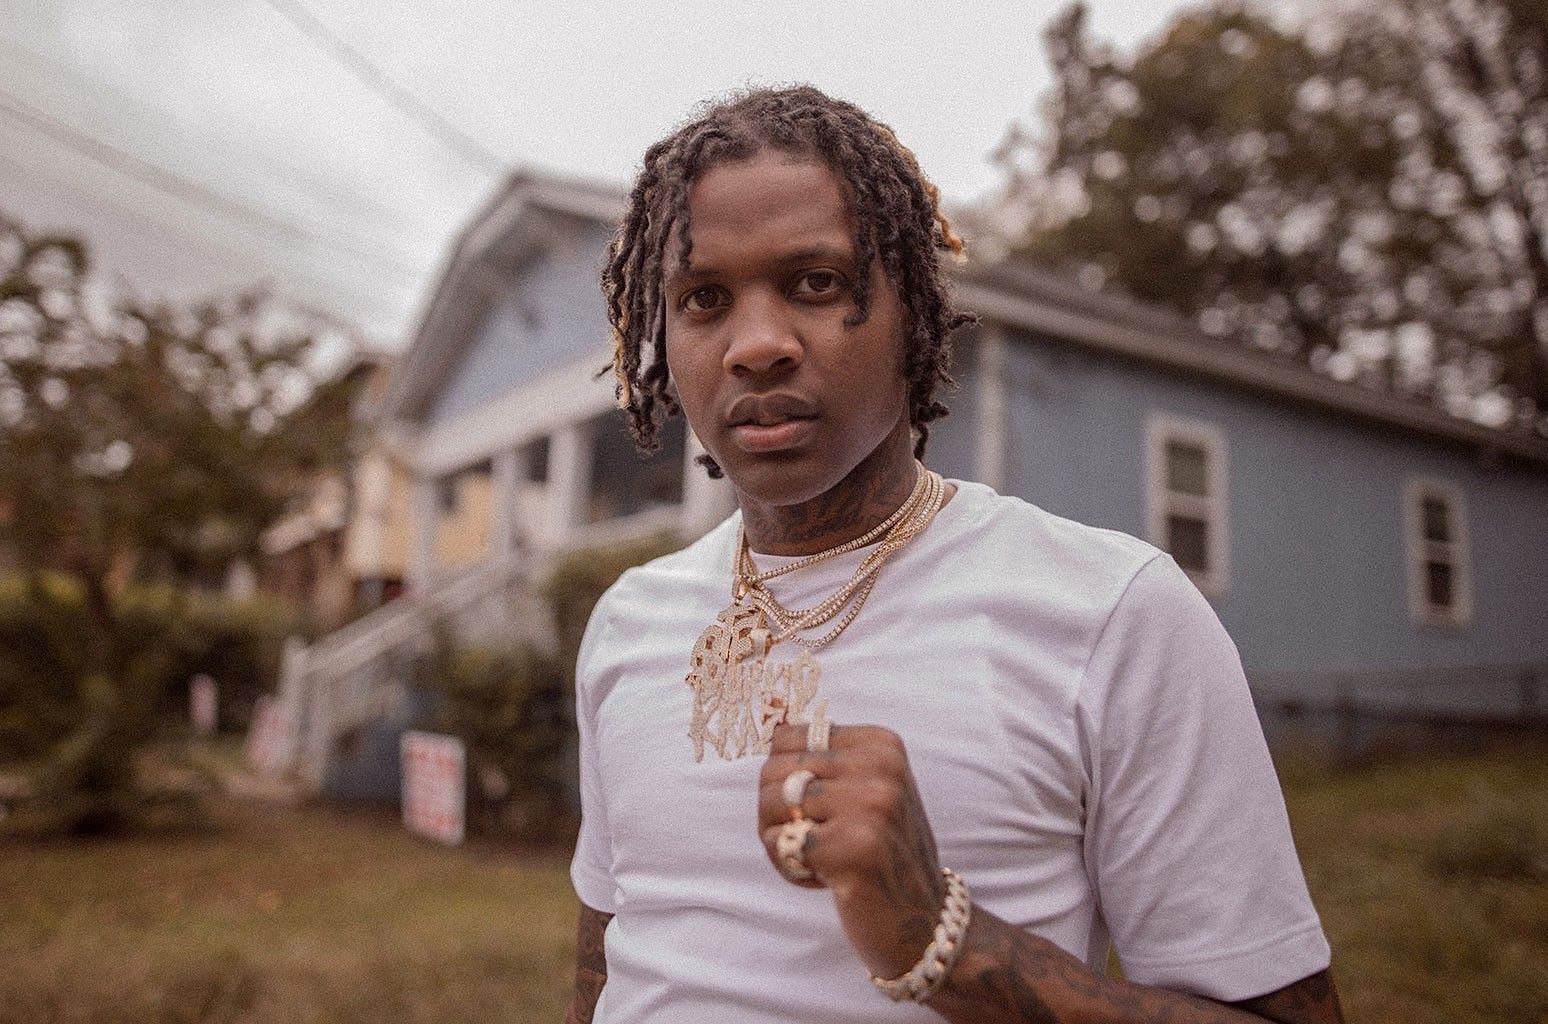 Lil Durk has been linked to several women throughout his career (Image via Getty Images)